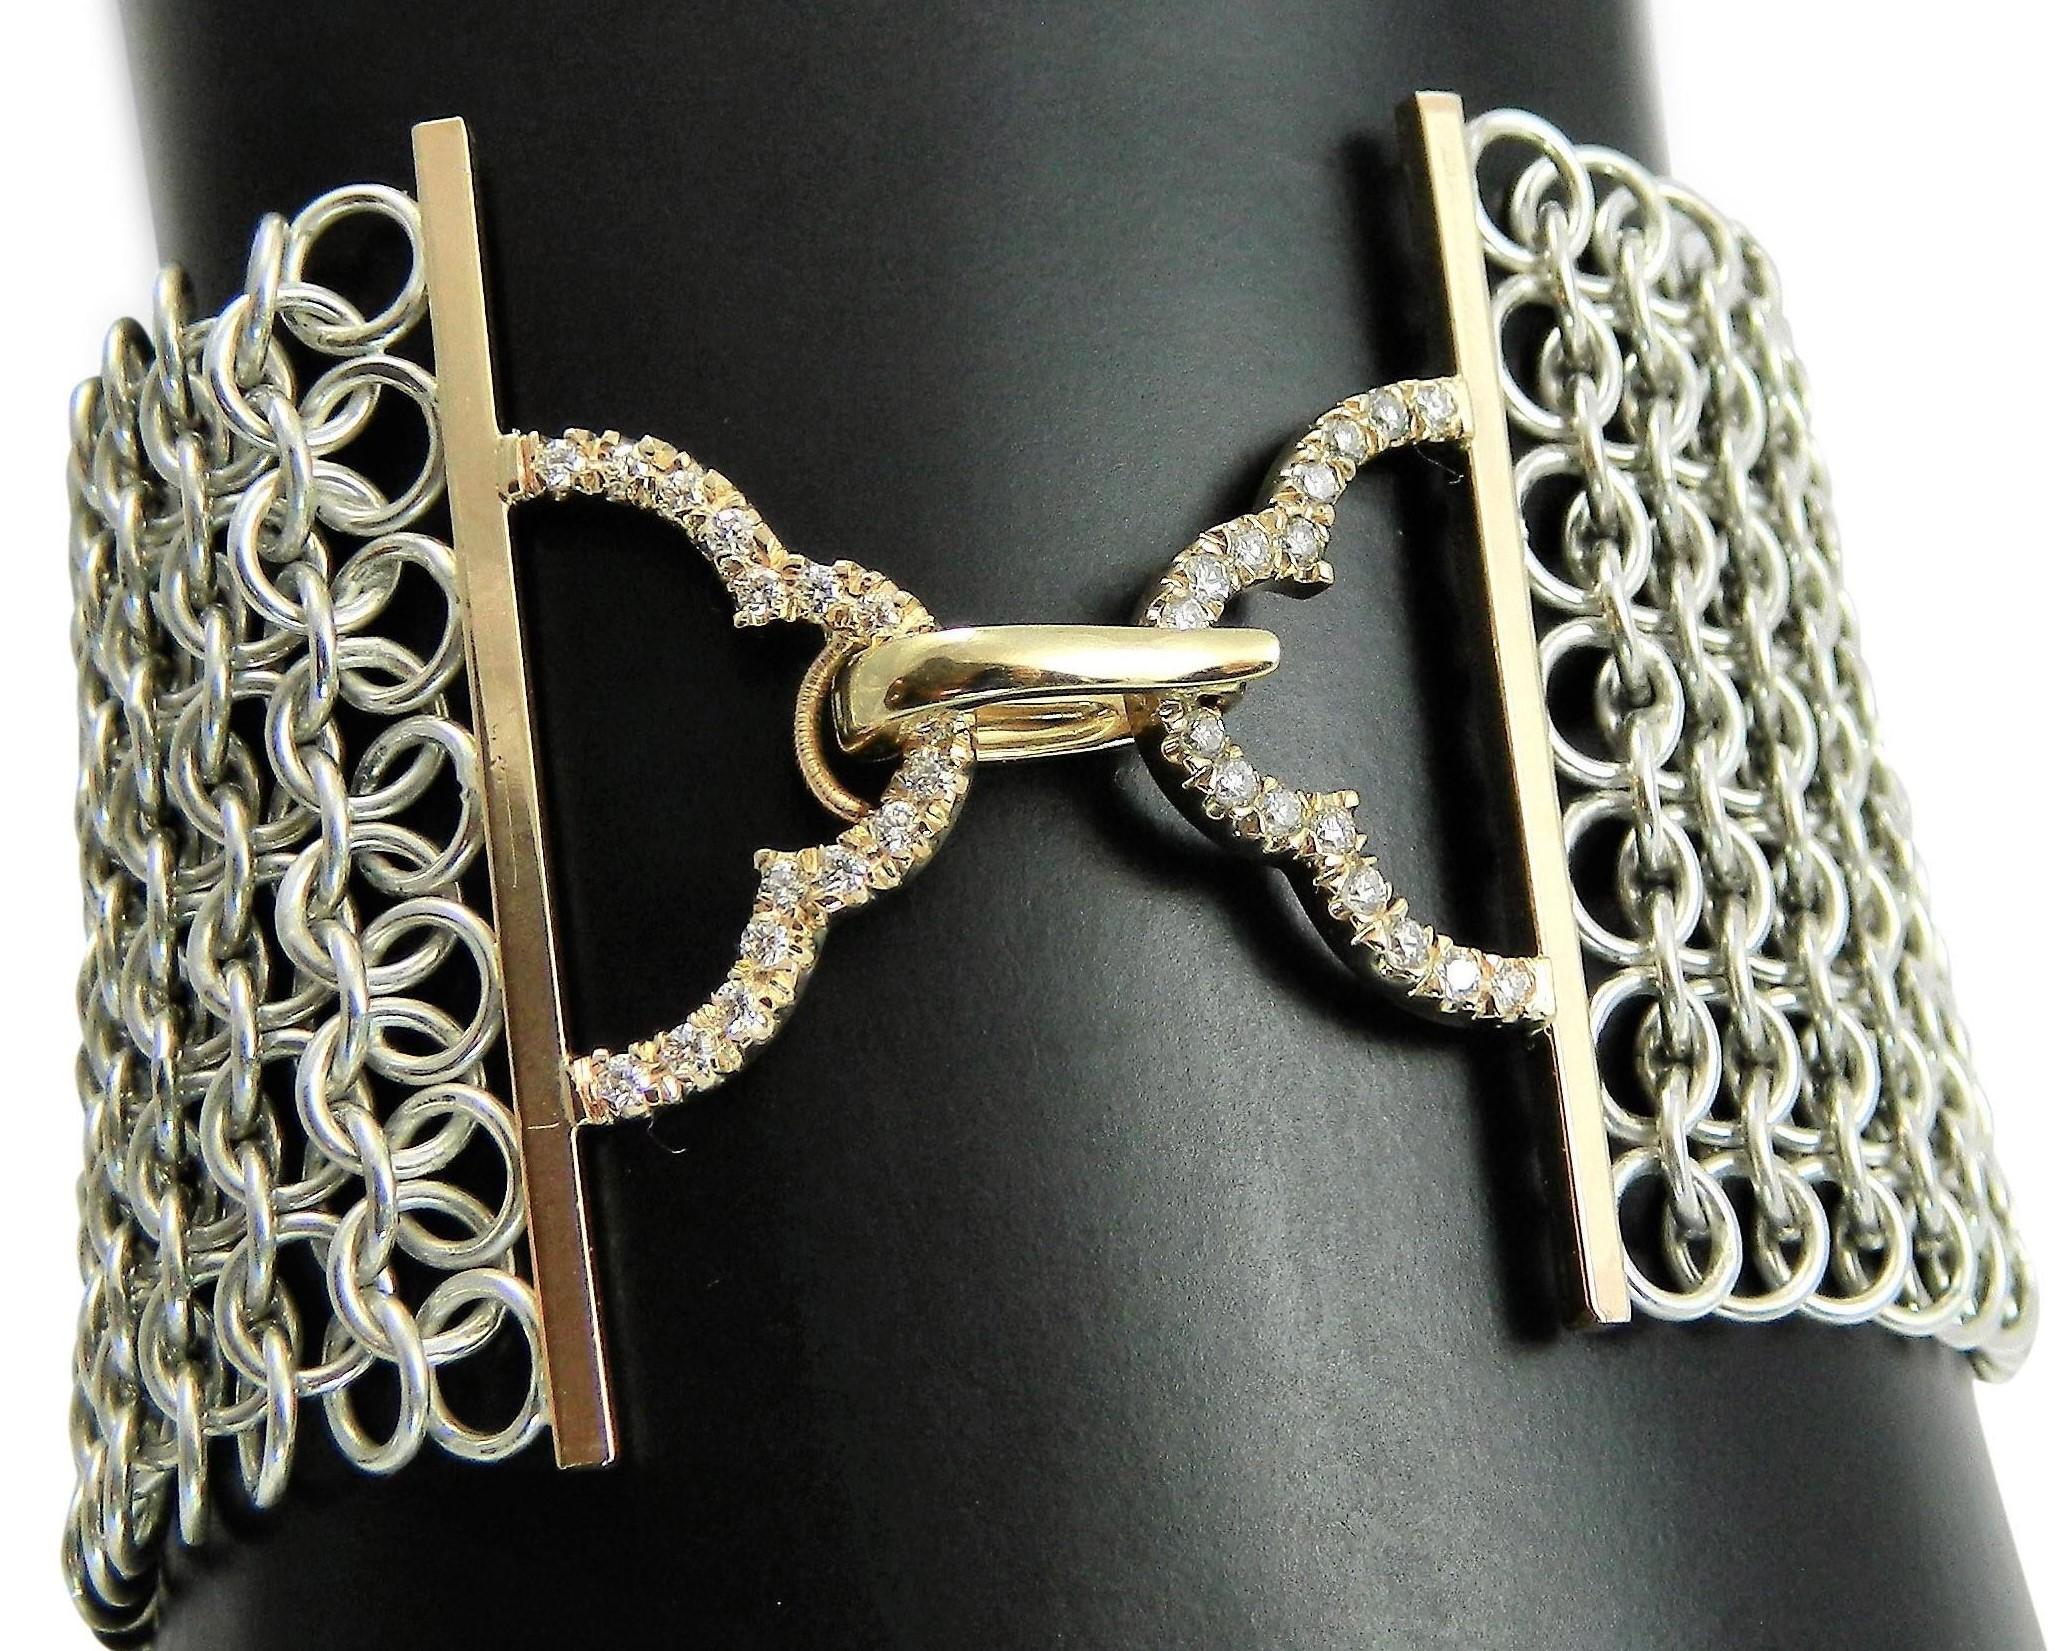 Art Deco Deco Power Bracelet with Diamonds, Silver, 14K Gold and Japanese made Chainmail For Sale